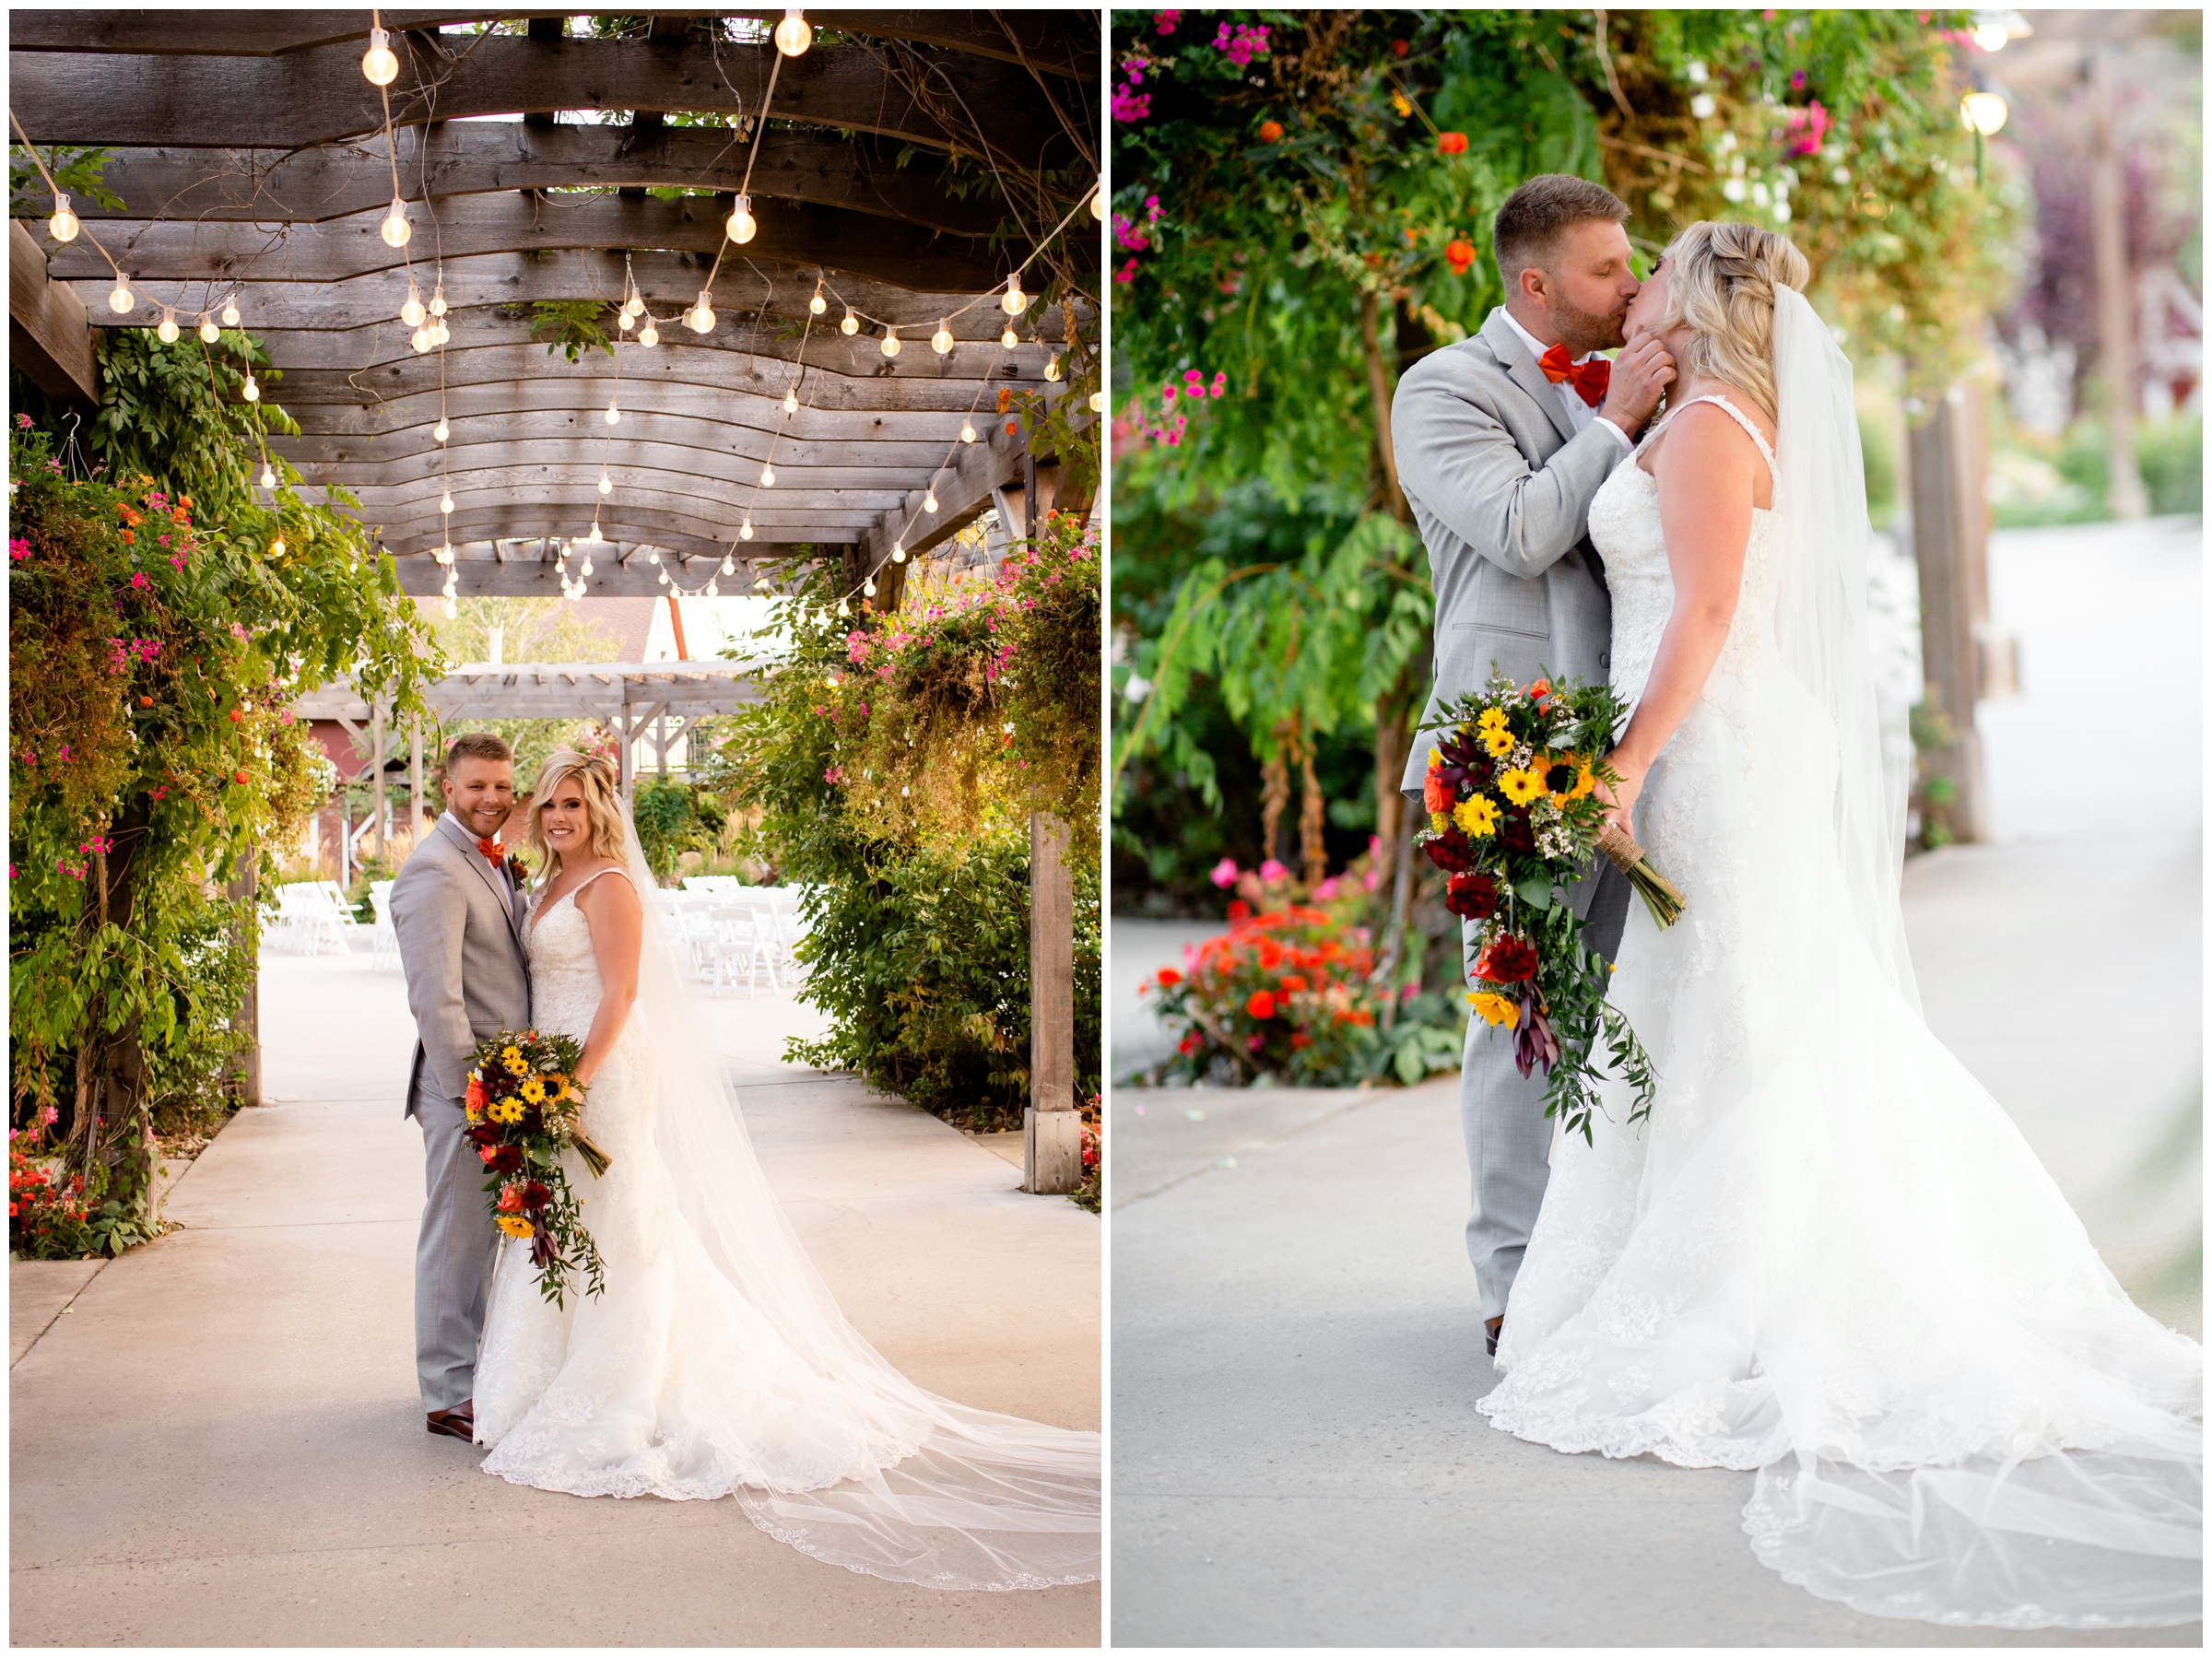 Brookside Gardens wedding pictures by Berthoud Colorado photographer Plum Pretty Photography